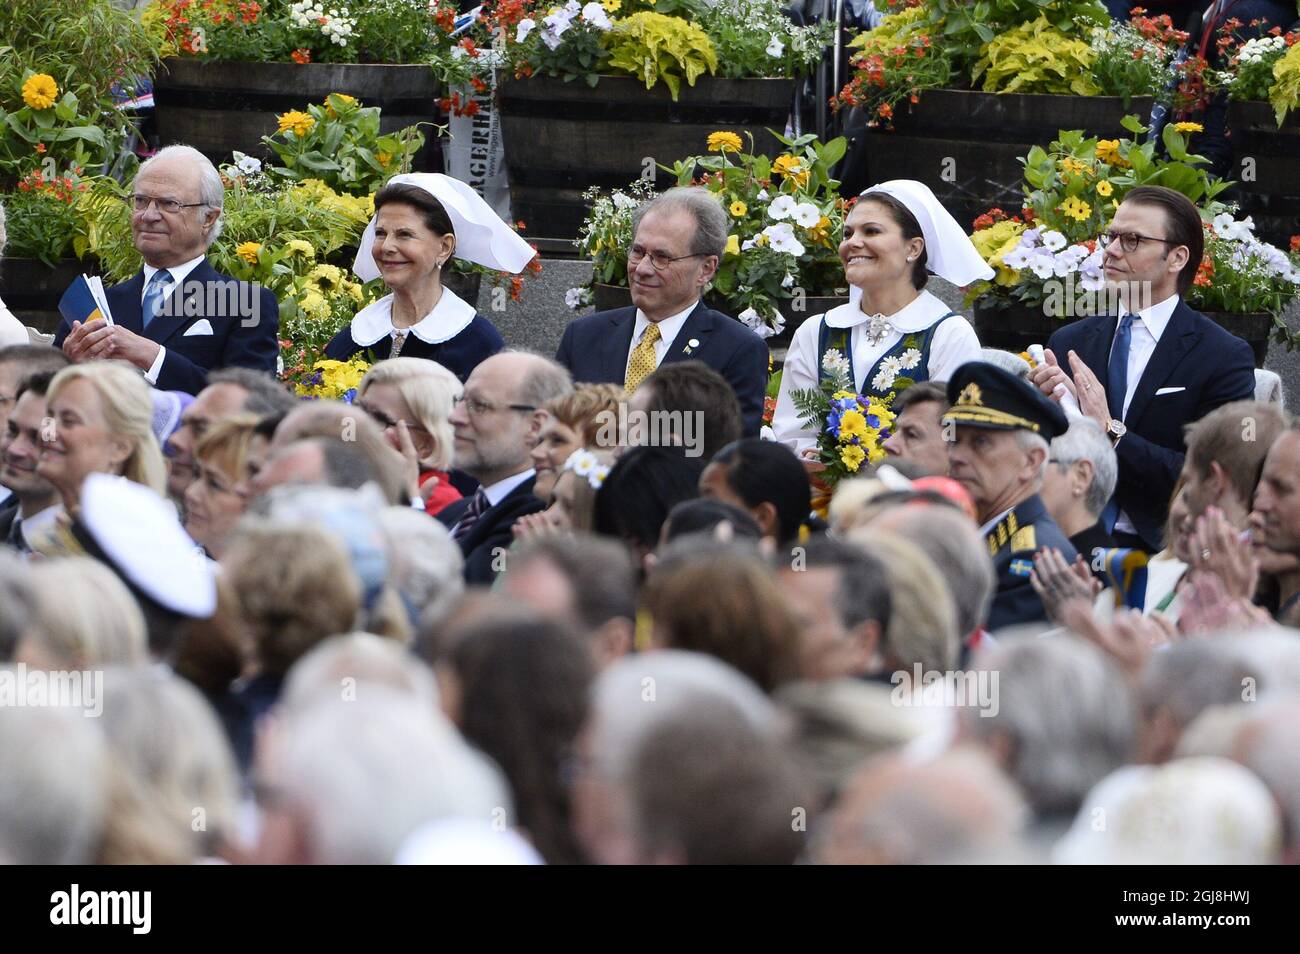 STOCKHOLM 2014-06-06 King Carl XVI Gustaf, Queen Silvia, speaker of the parliament Per Westerberg, Crown Princess Victoria and Prince Daniel during the Swedish National Day celebrations at the Skansen open-air museum in Stockholm, Sweden, June 6, 2014. Photo: Claudio Bresciani / TT / Code 10090 Stock Photo